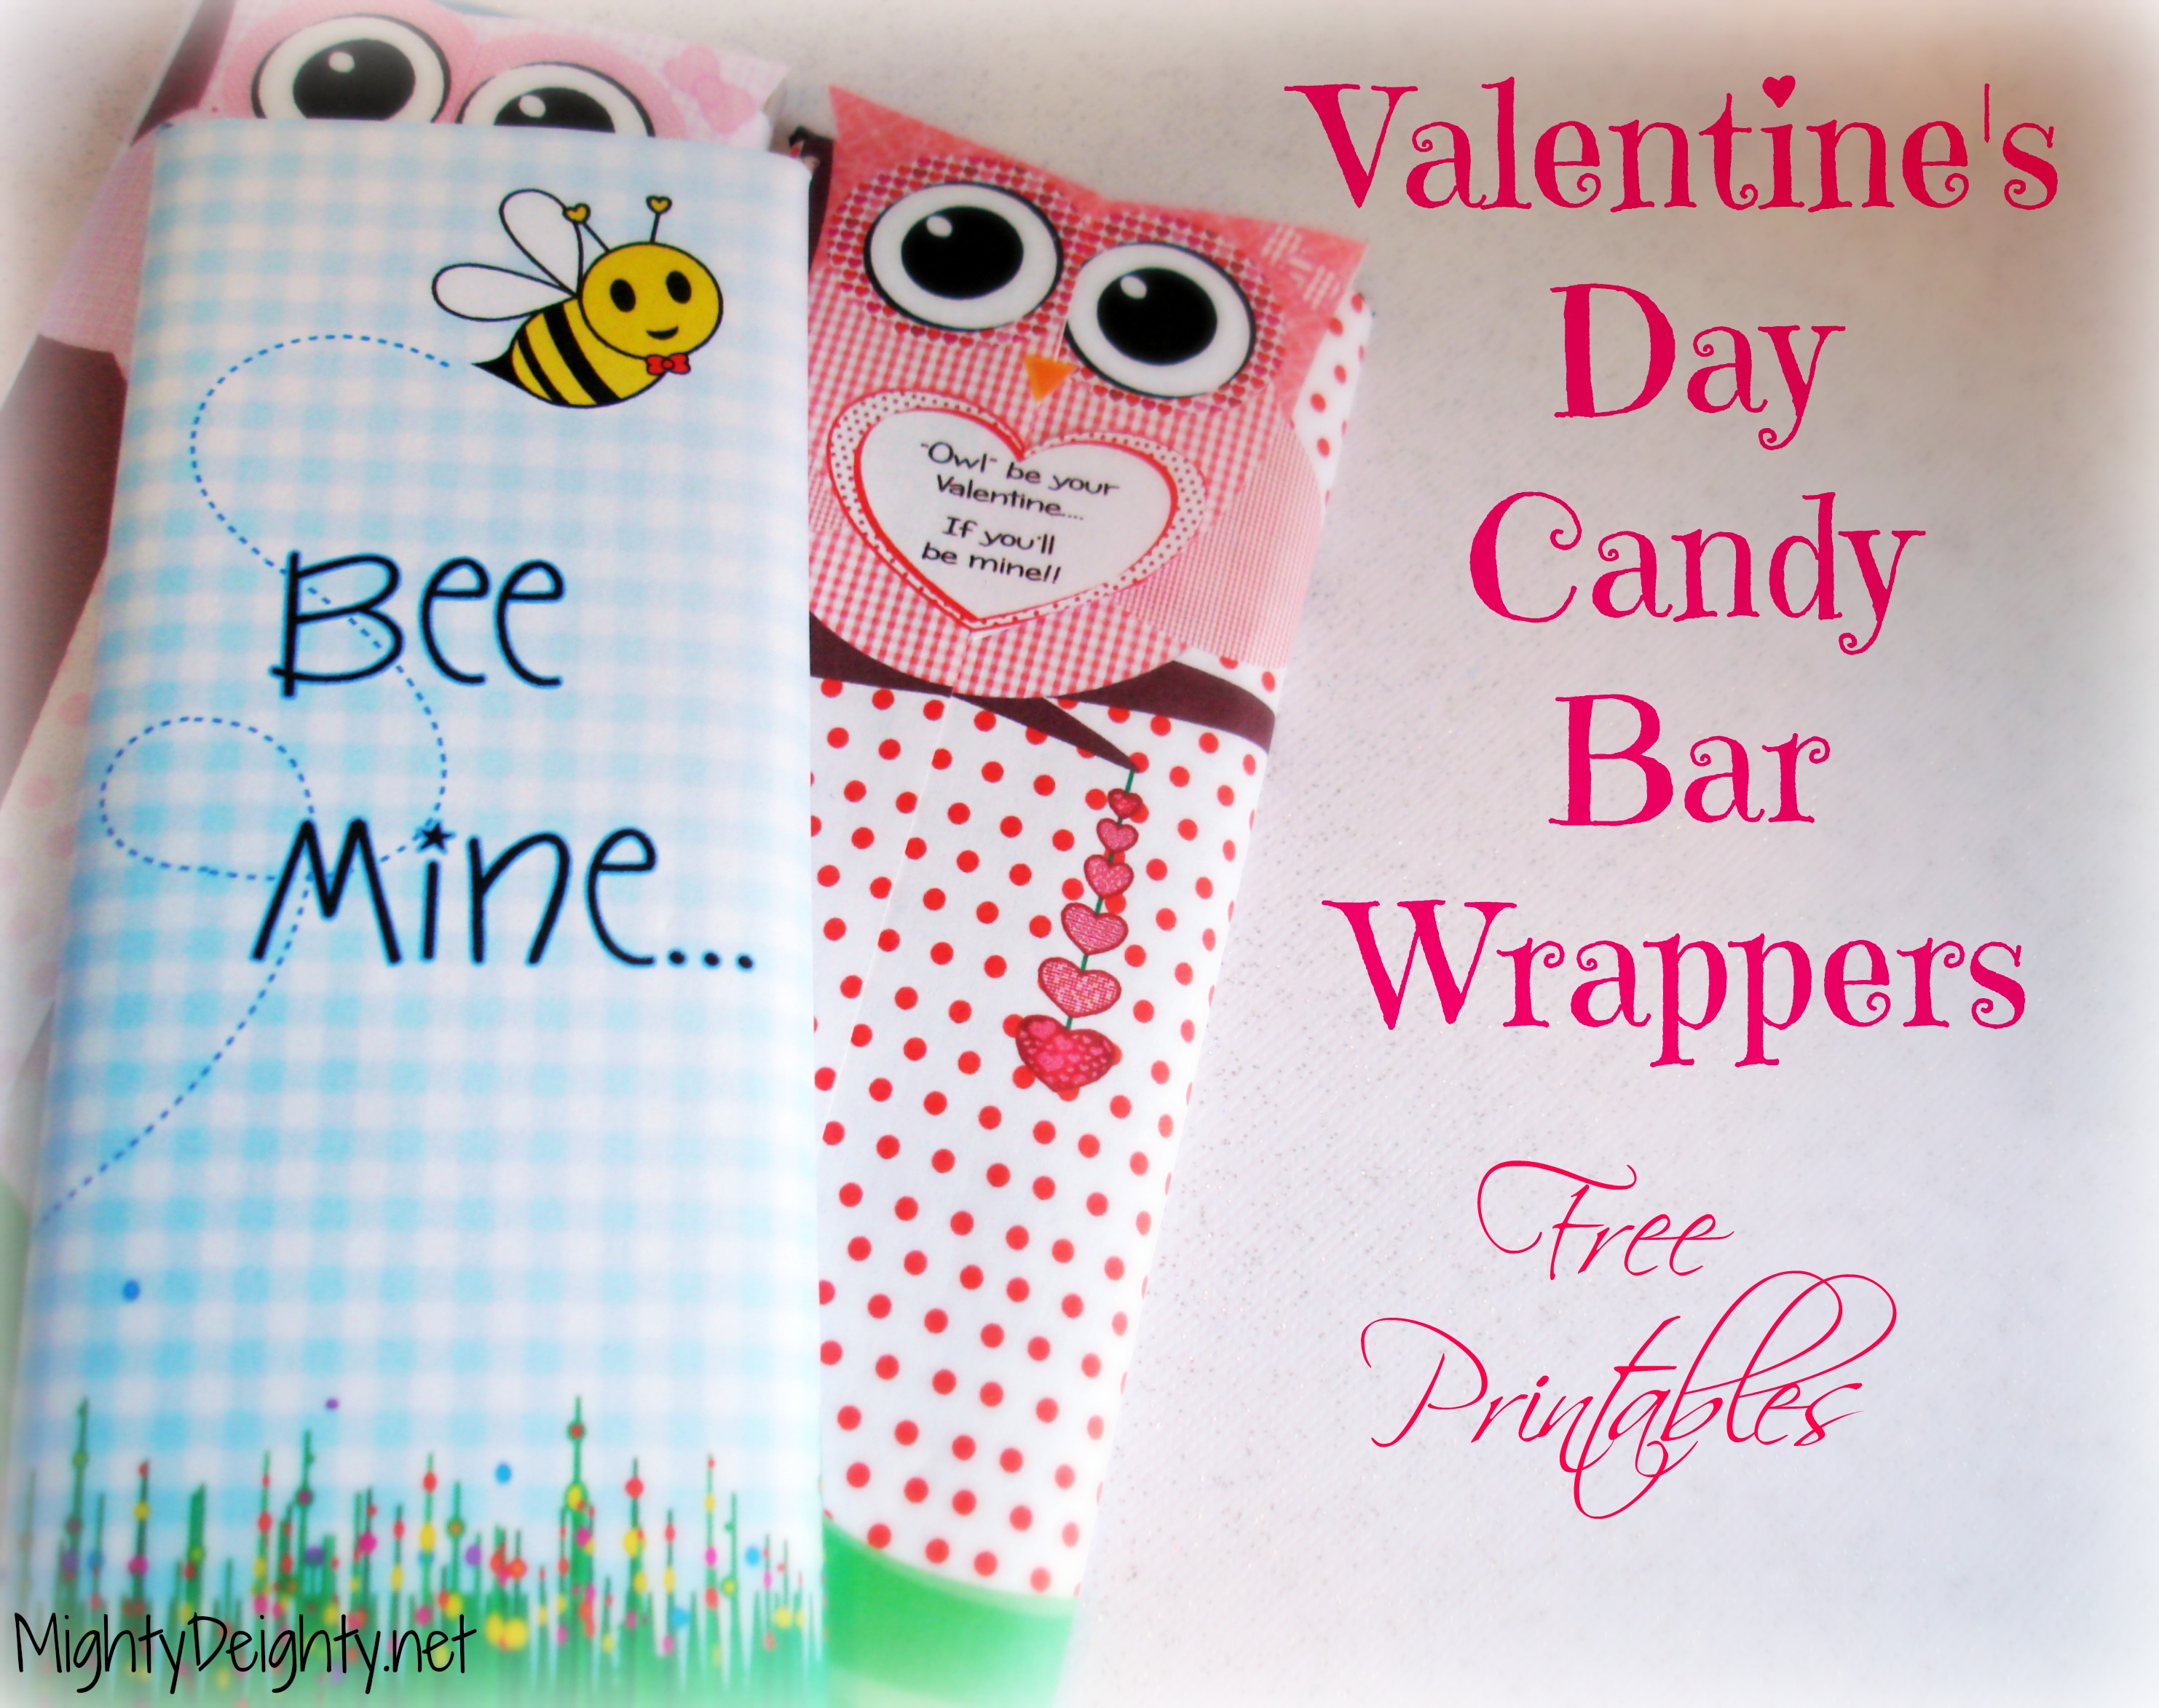 Candy Bars Wrappers Print Free